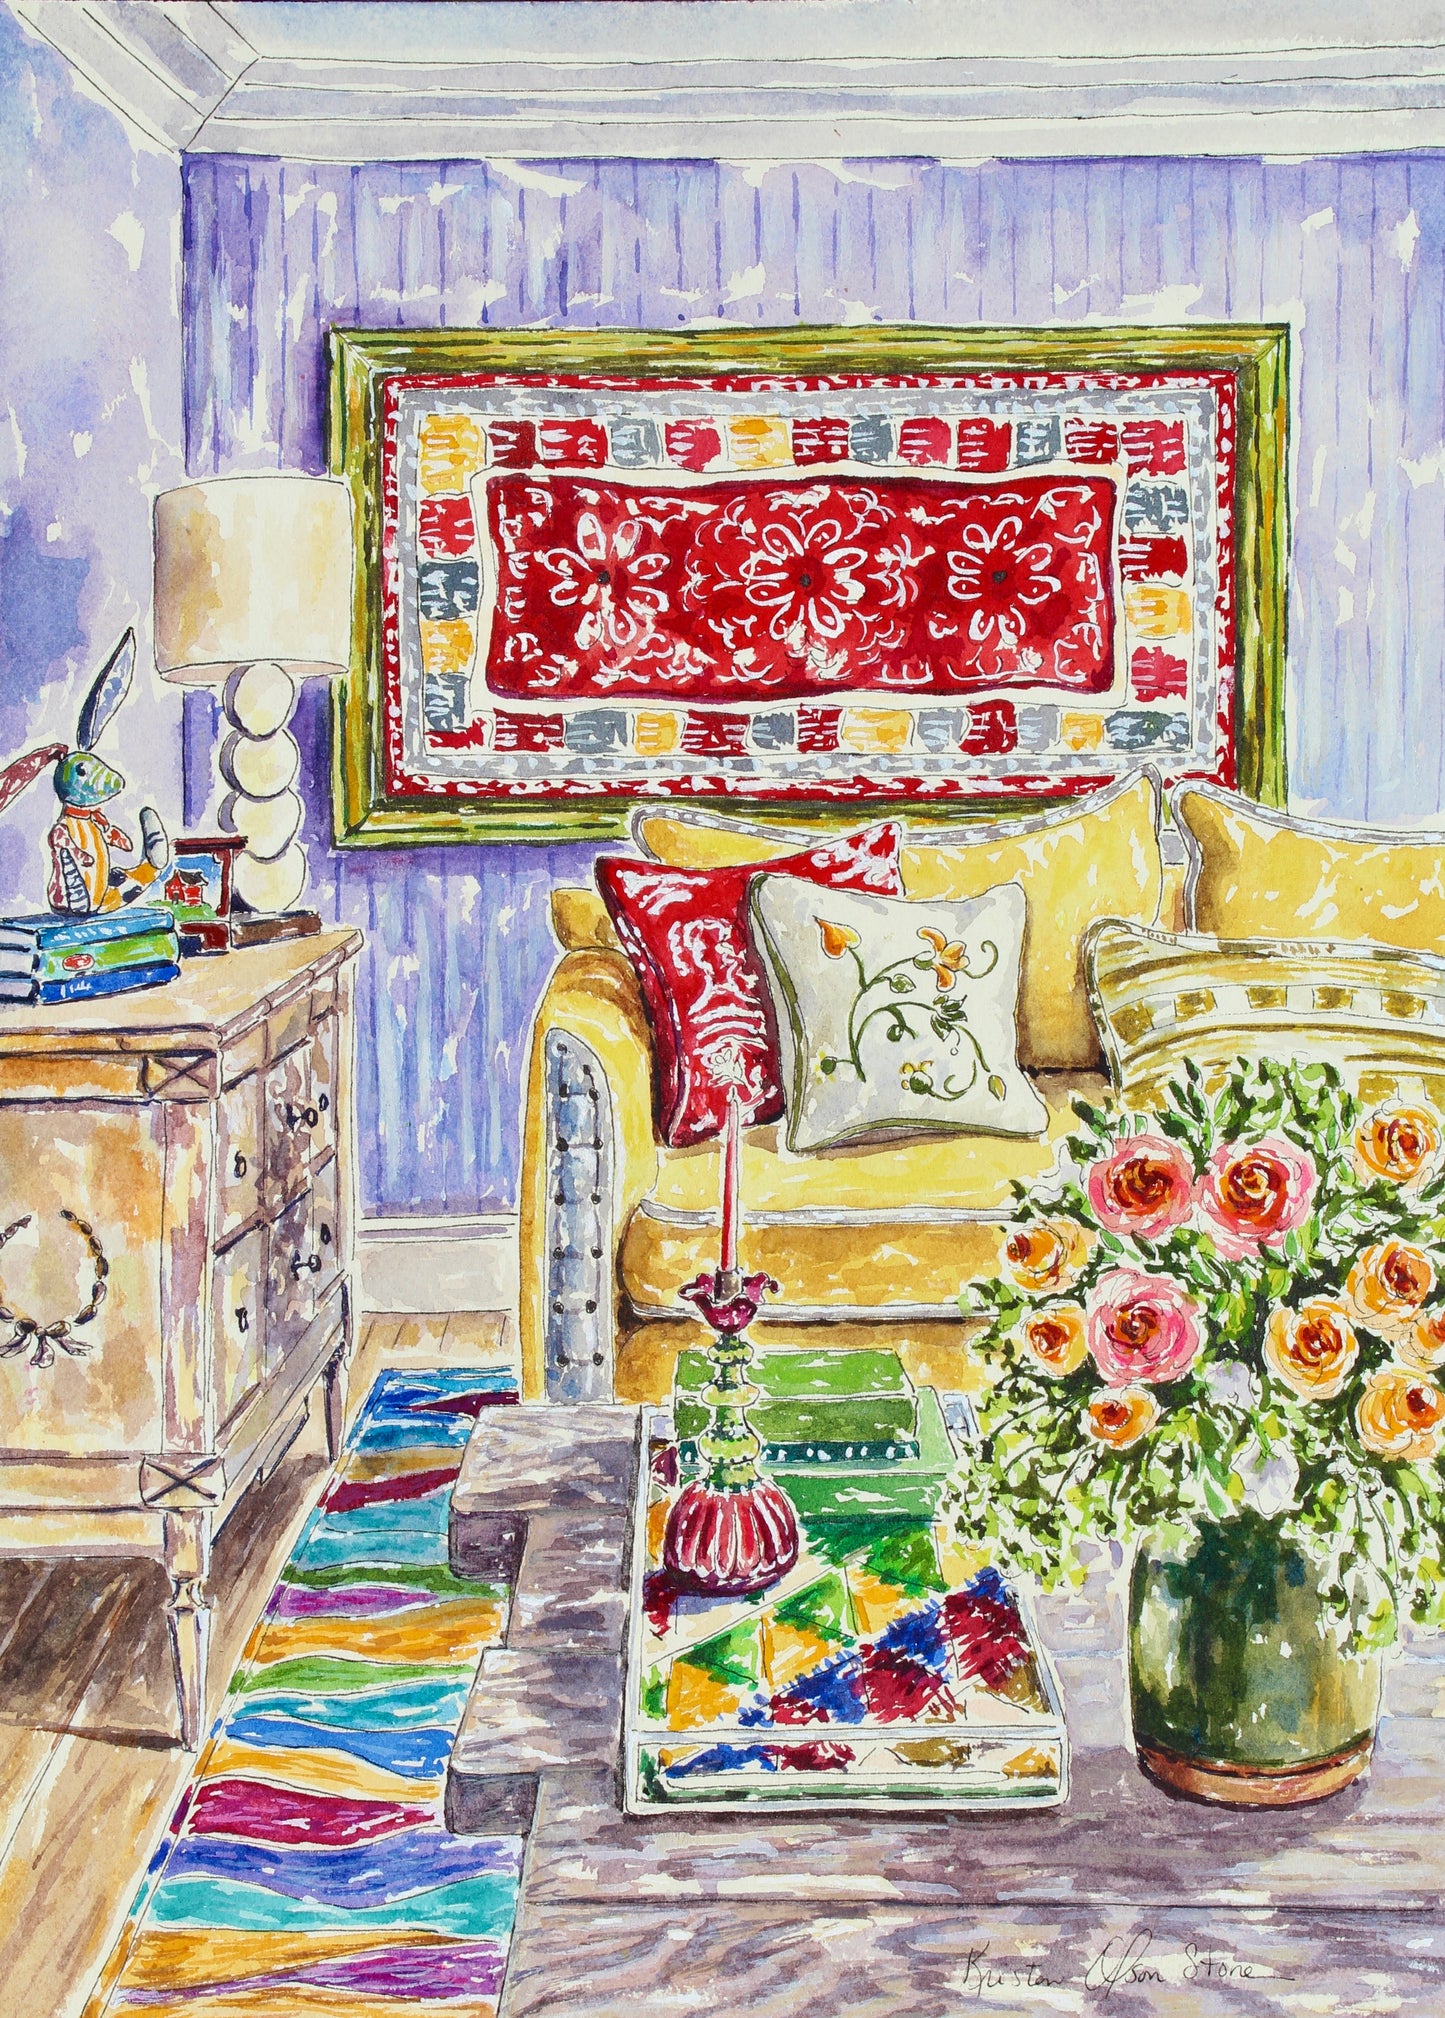 The Rabbit Rules, An Original 14" x 10" Watercolor And Ink Painting Of A Colorful Room Scene With Flowers And Stuffed Rabbit